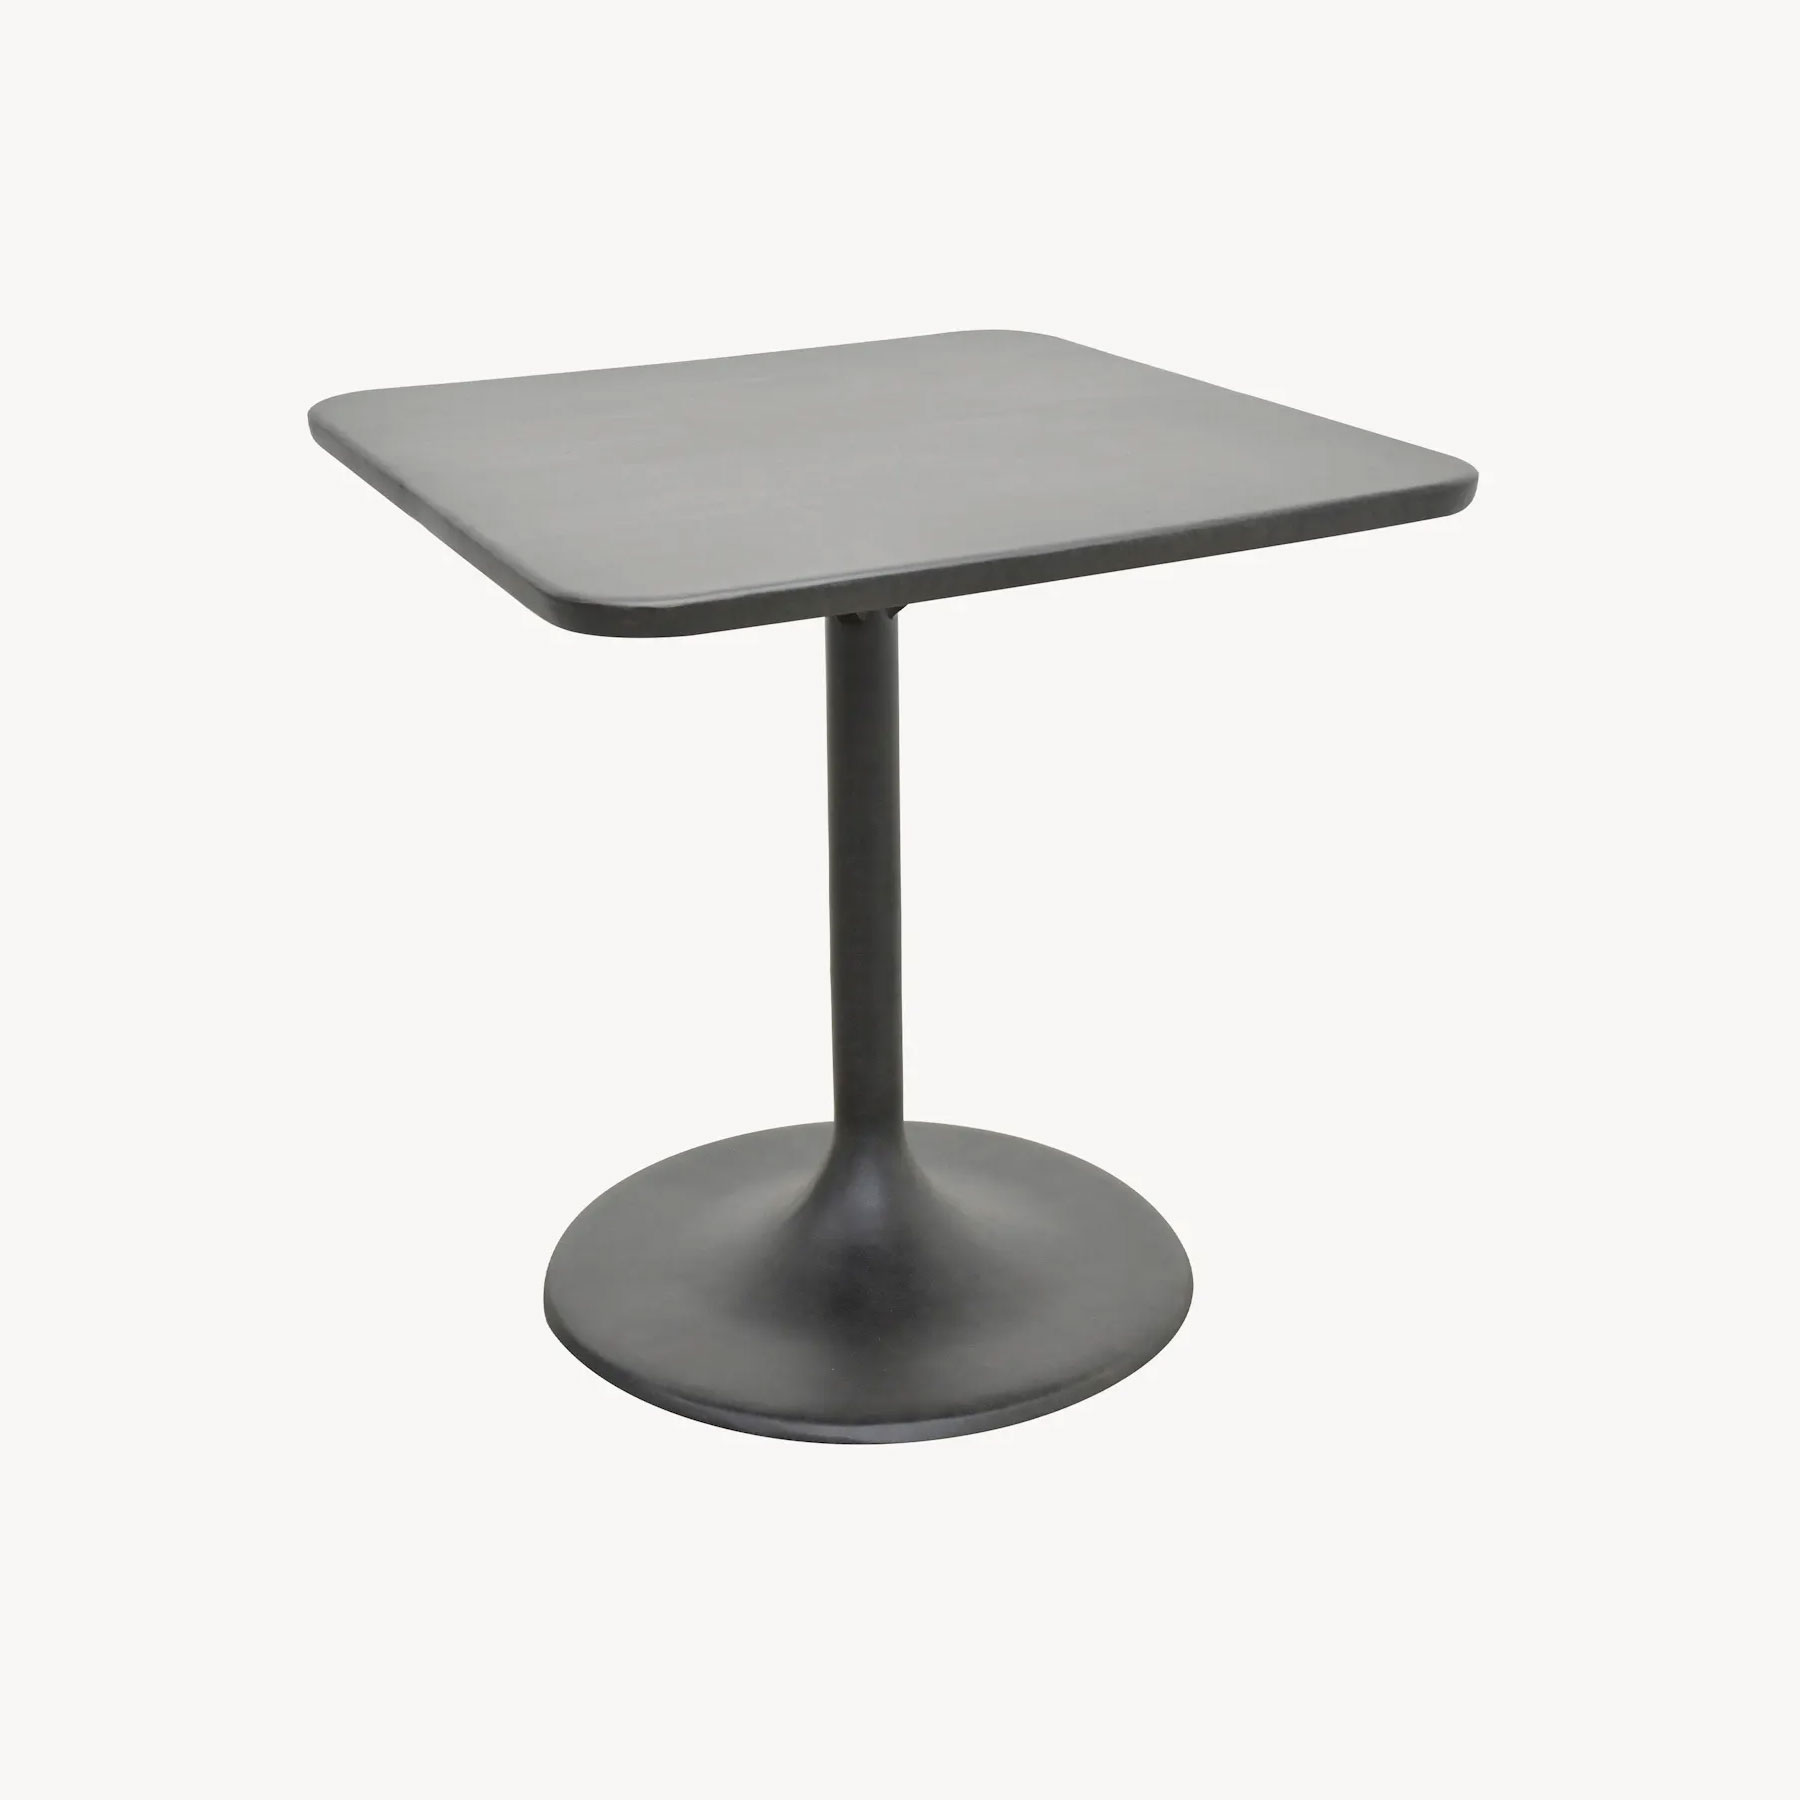 Castelle Tulip 36 inch Square Bar Height Table 